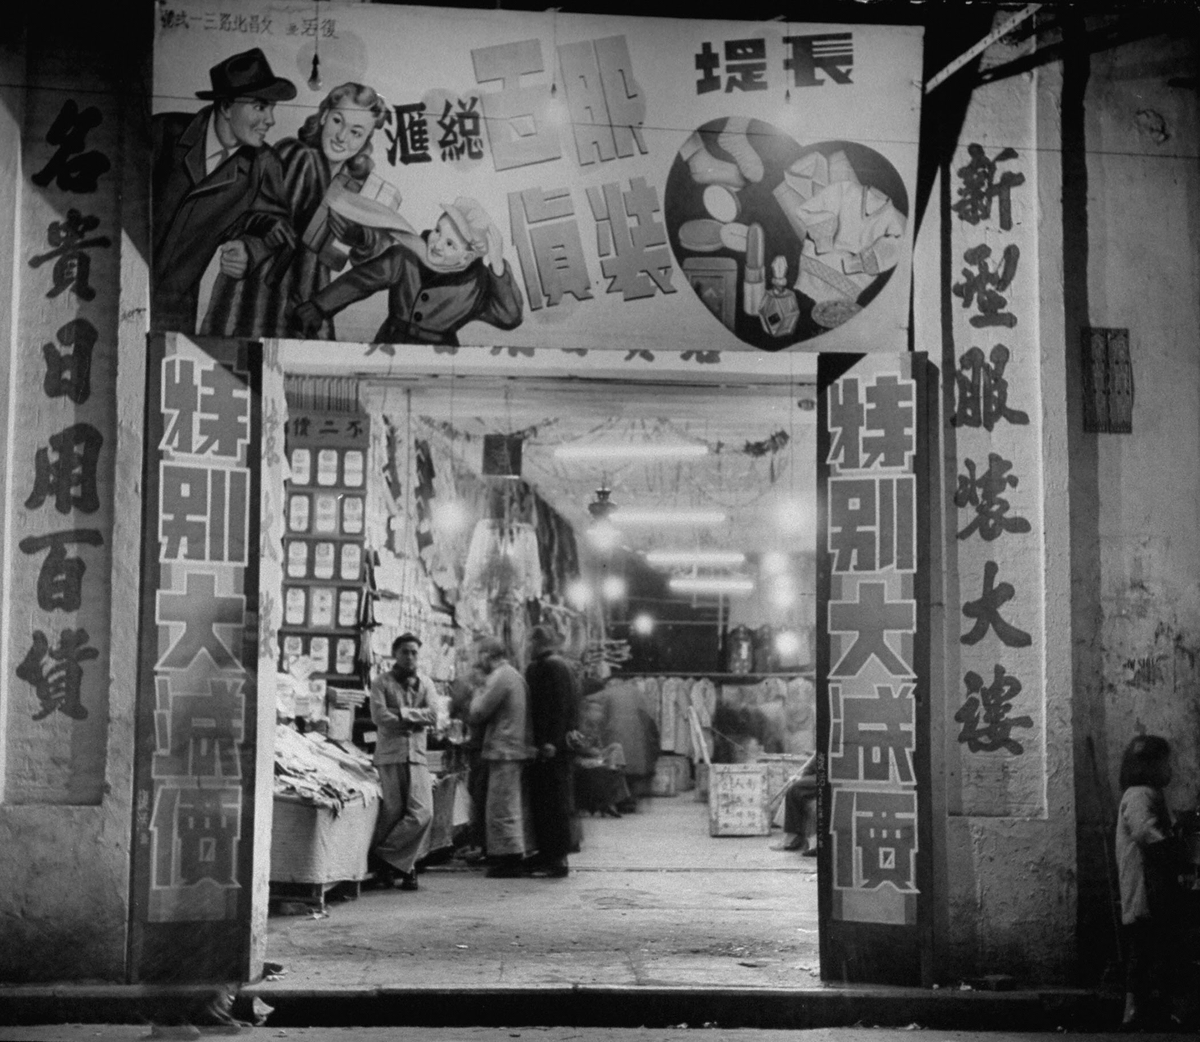 Department store entrance in Guangzhou captured by Carl Mydans in 1949.